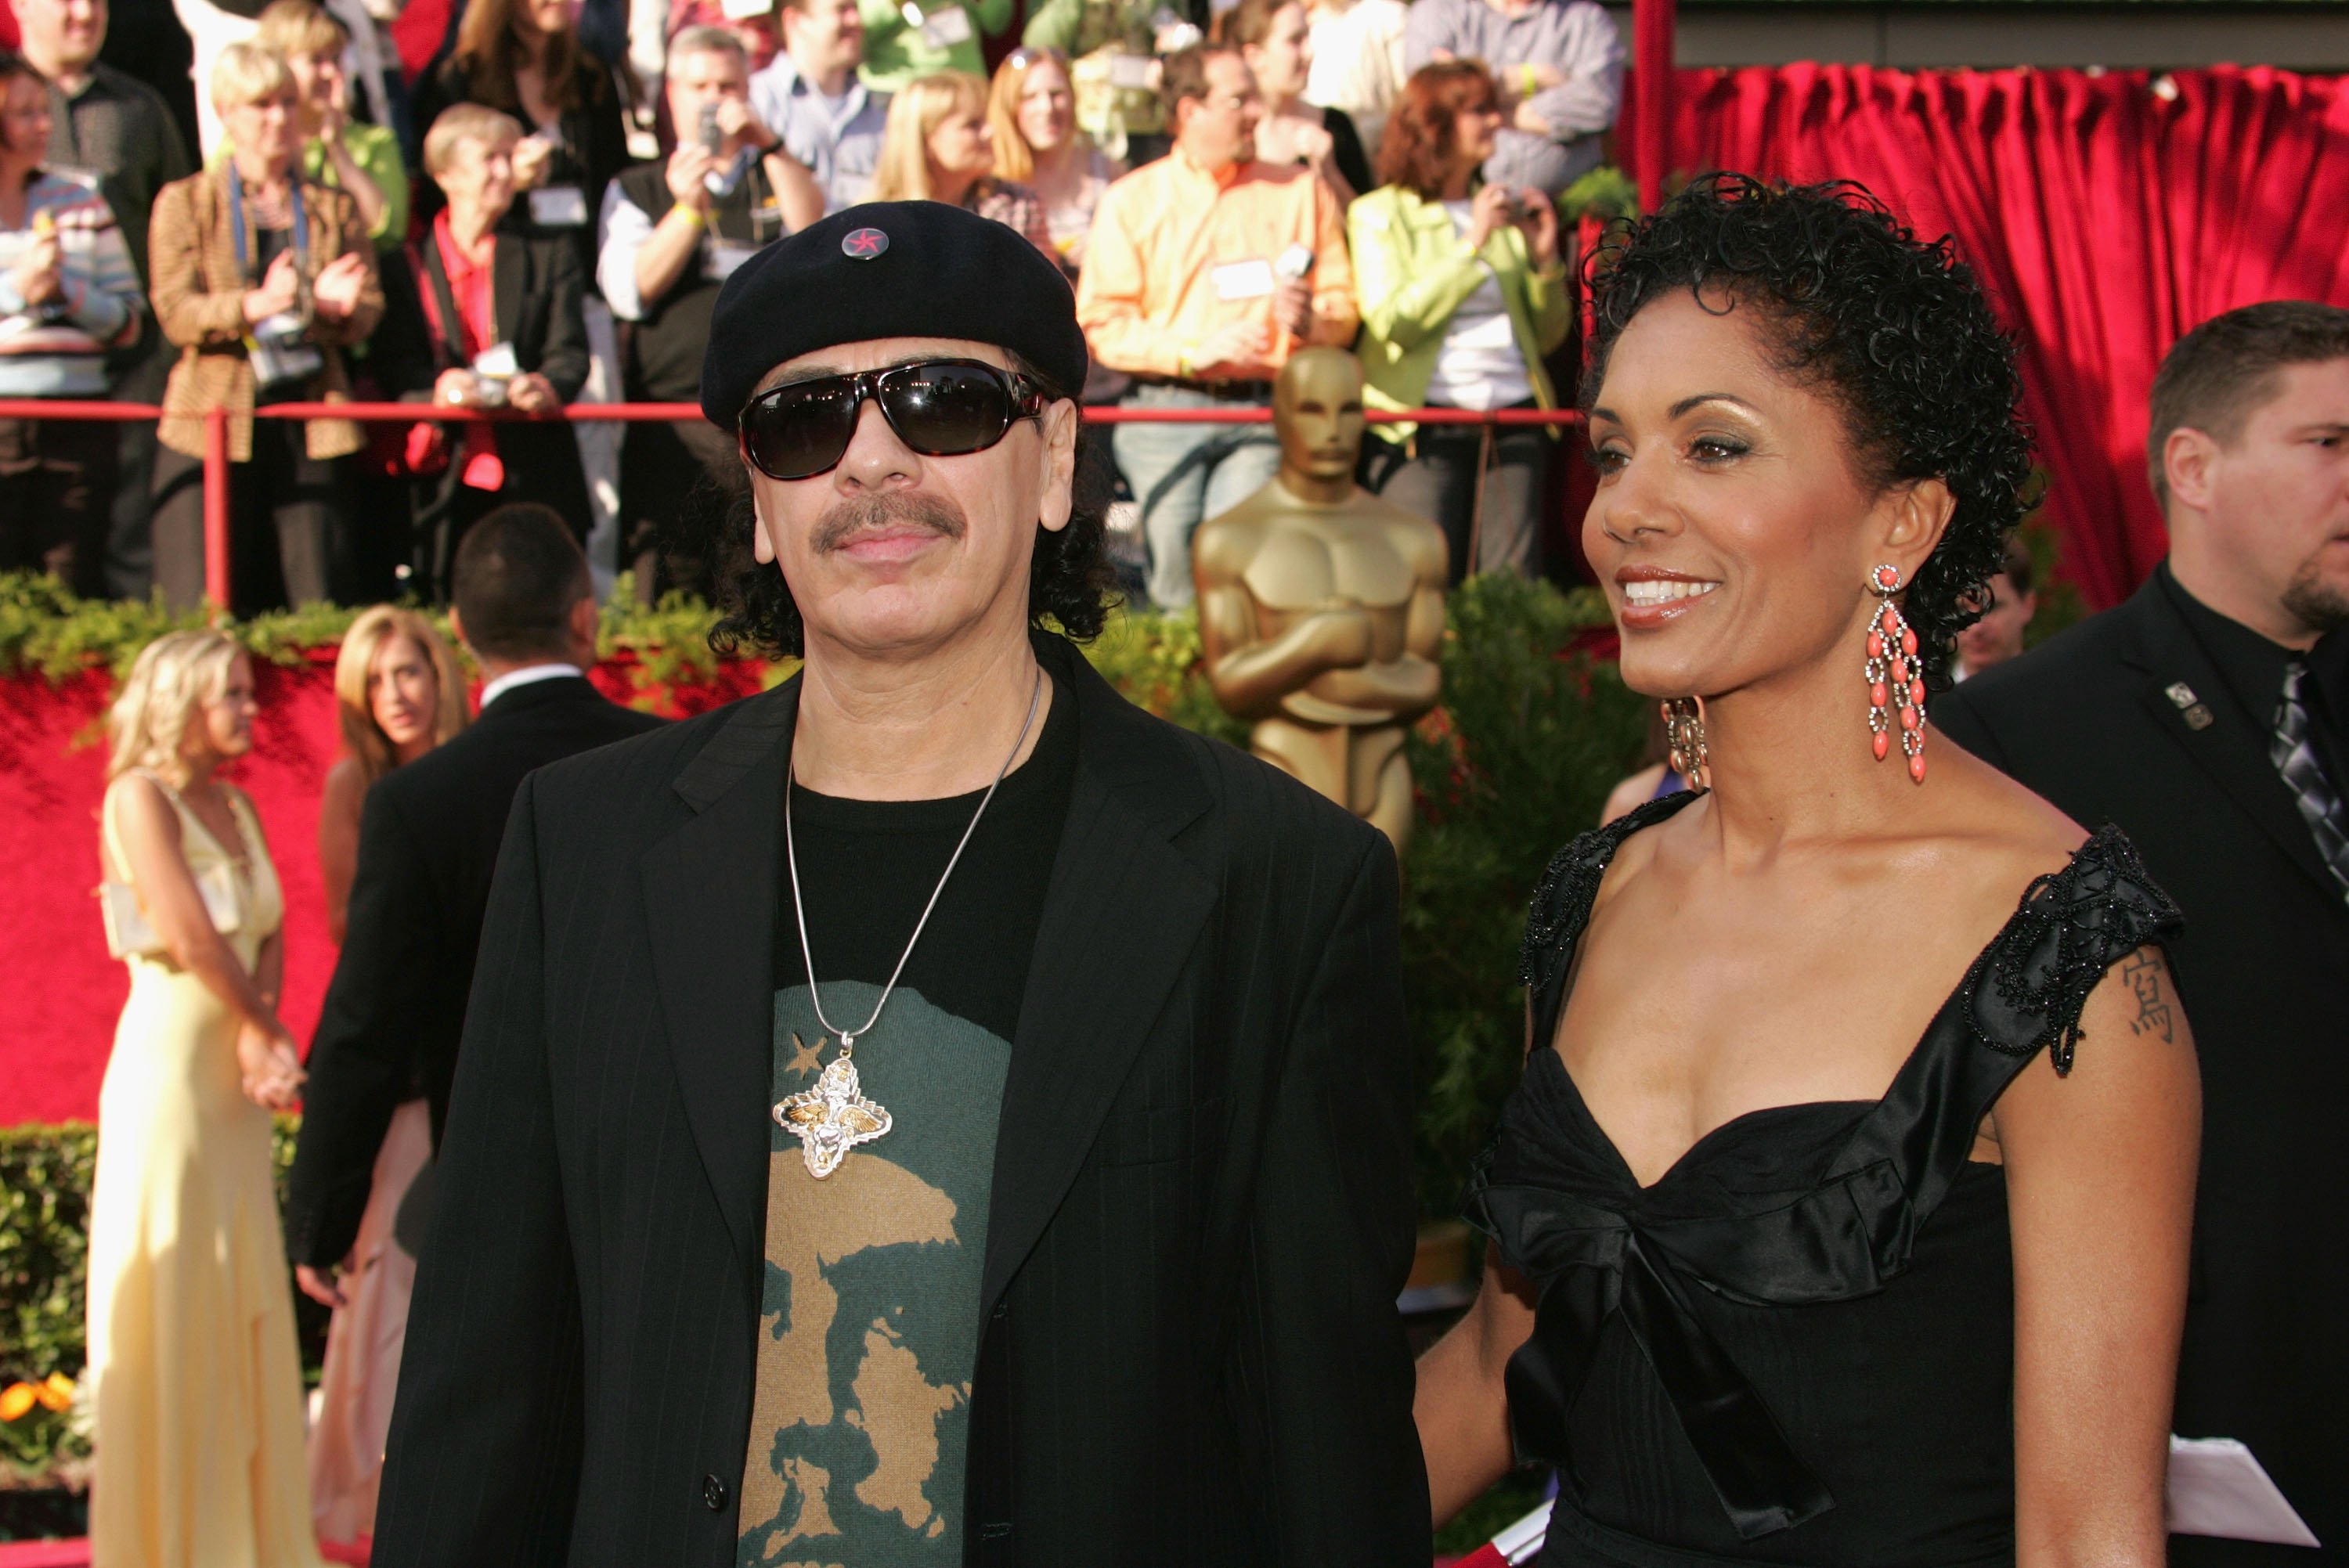 Carlos Santana and Deborah King at the 77th Annual Academy Awards on February 27, 2005 | Source: Getty Images